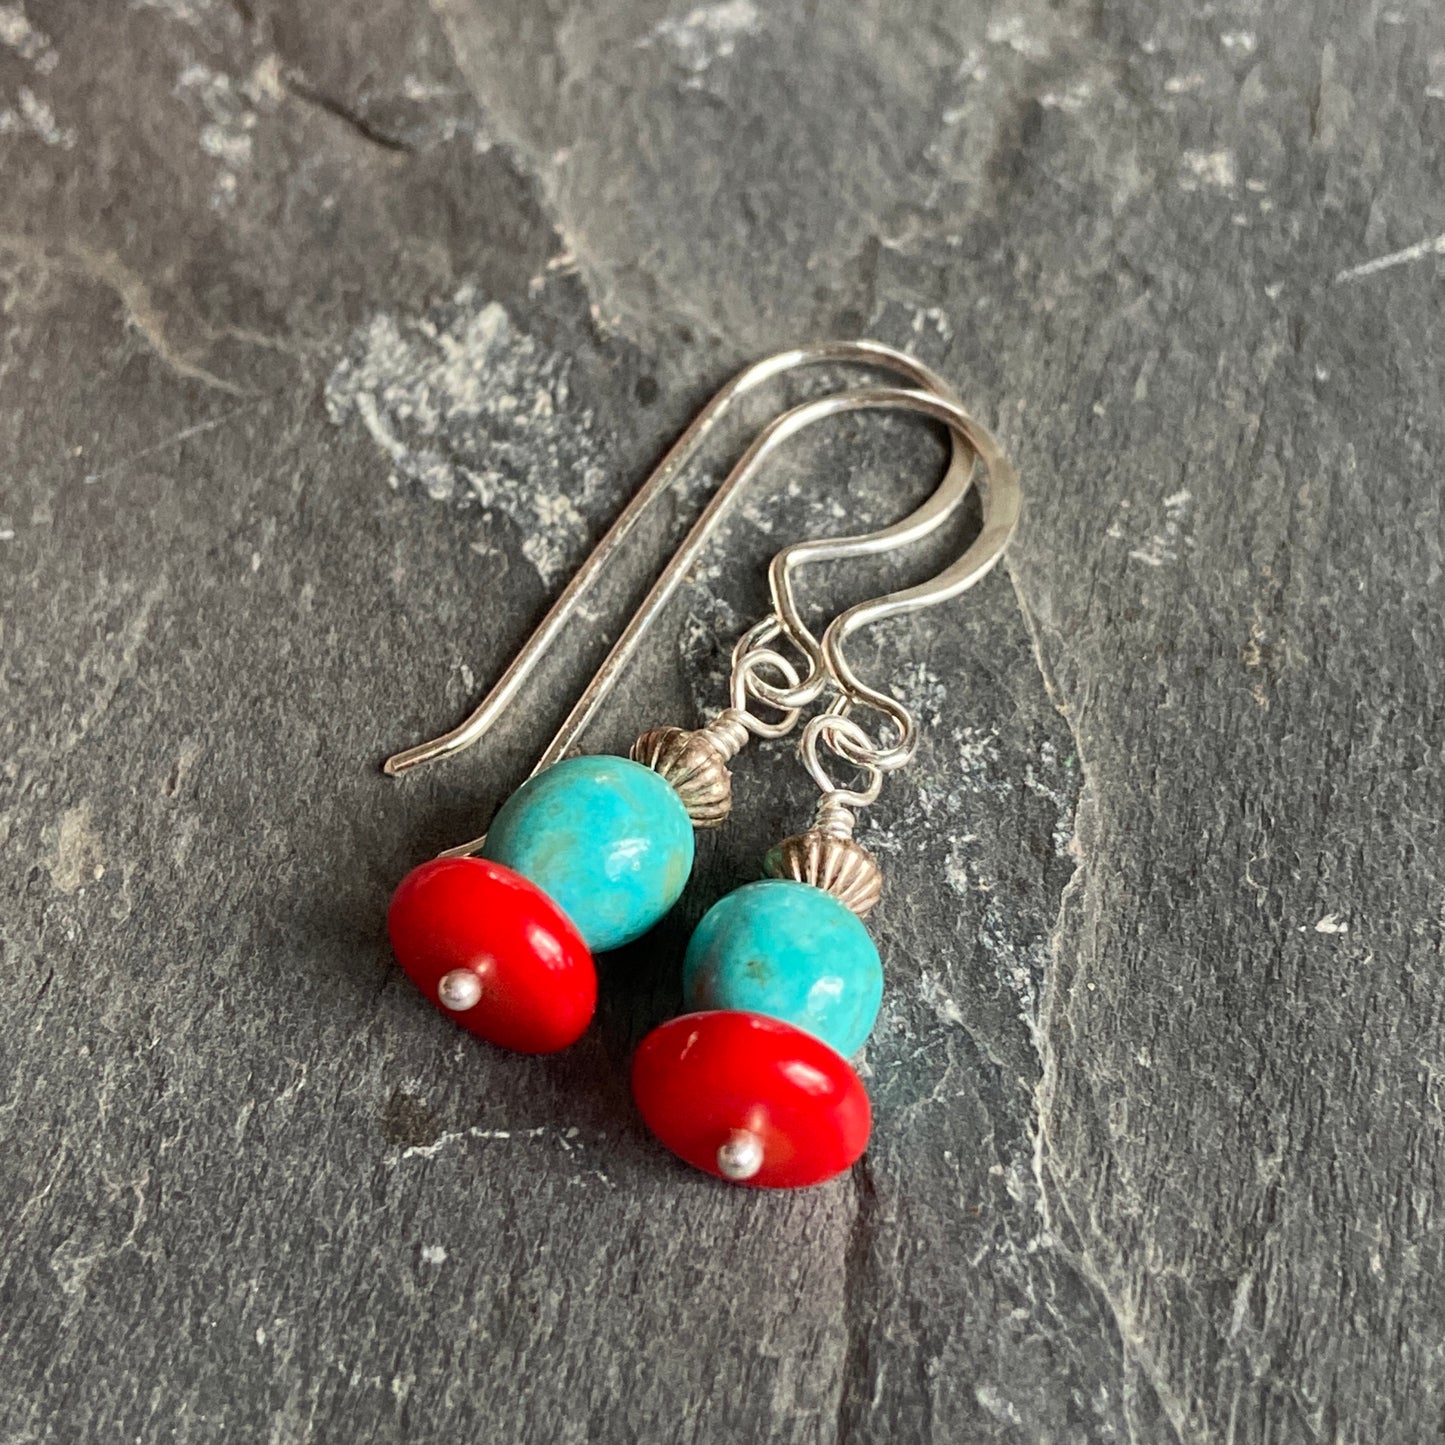 Red Coral & Kingman Turquoise Earrings on Sterling Silver All Handmade